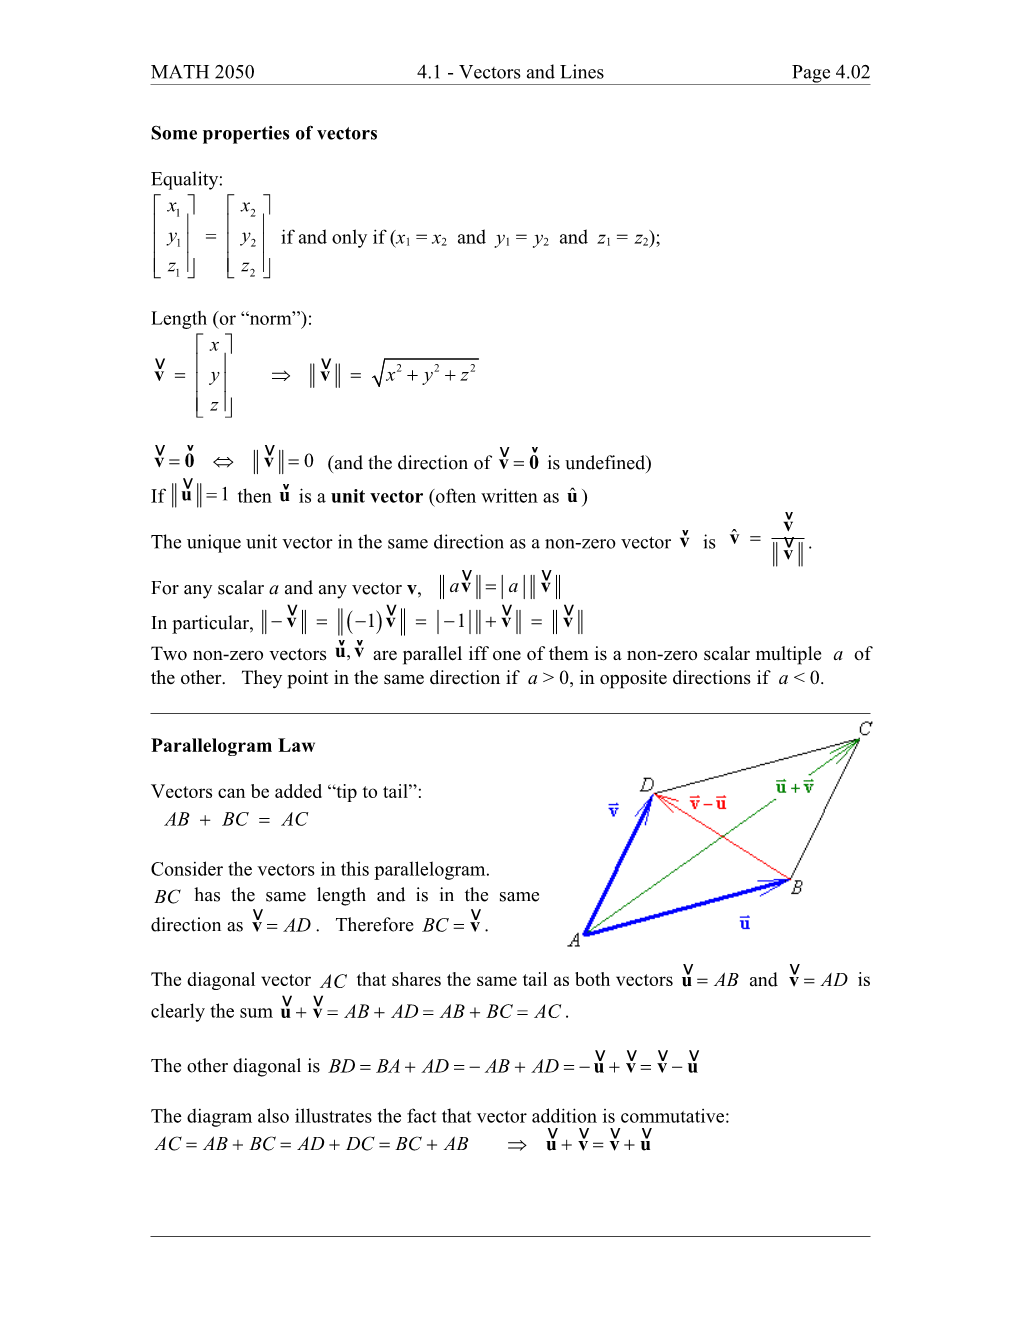 MATH 2050 Chapter 4 Lecture Notes